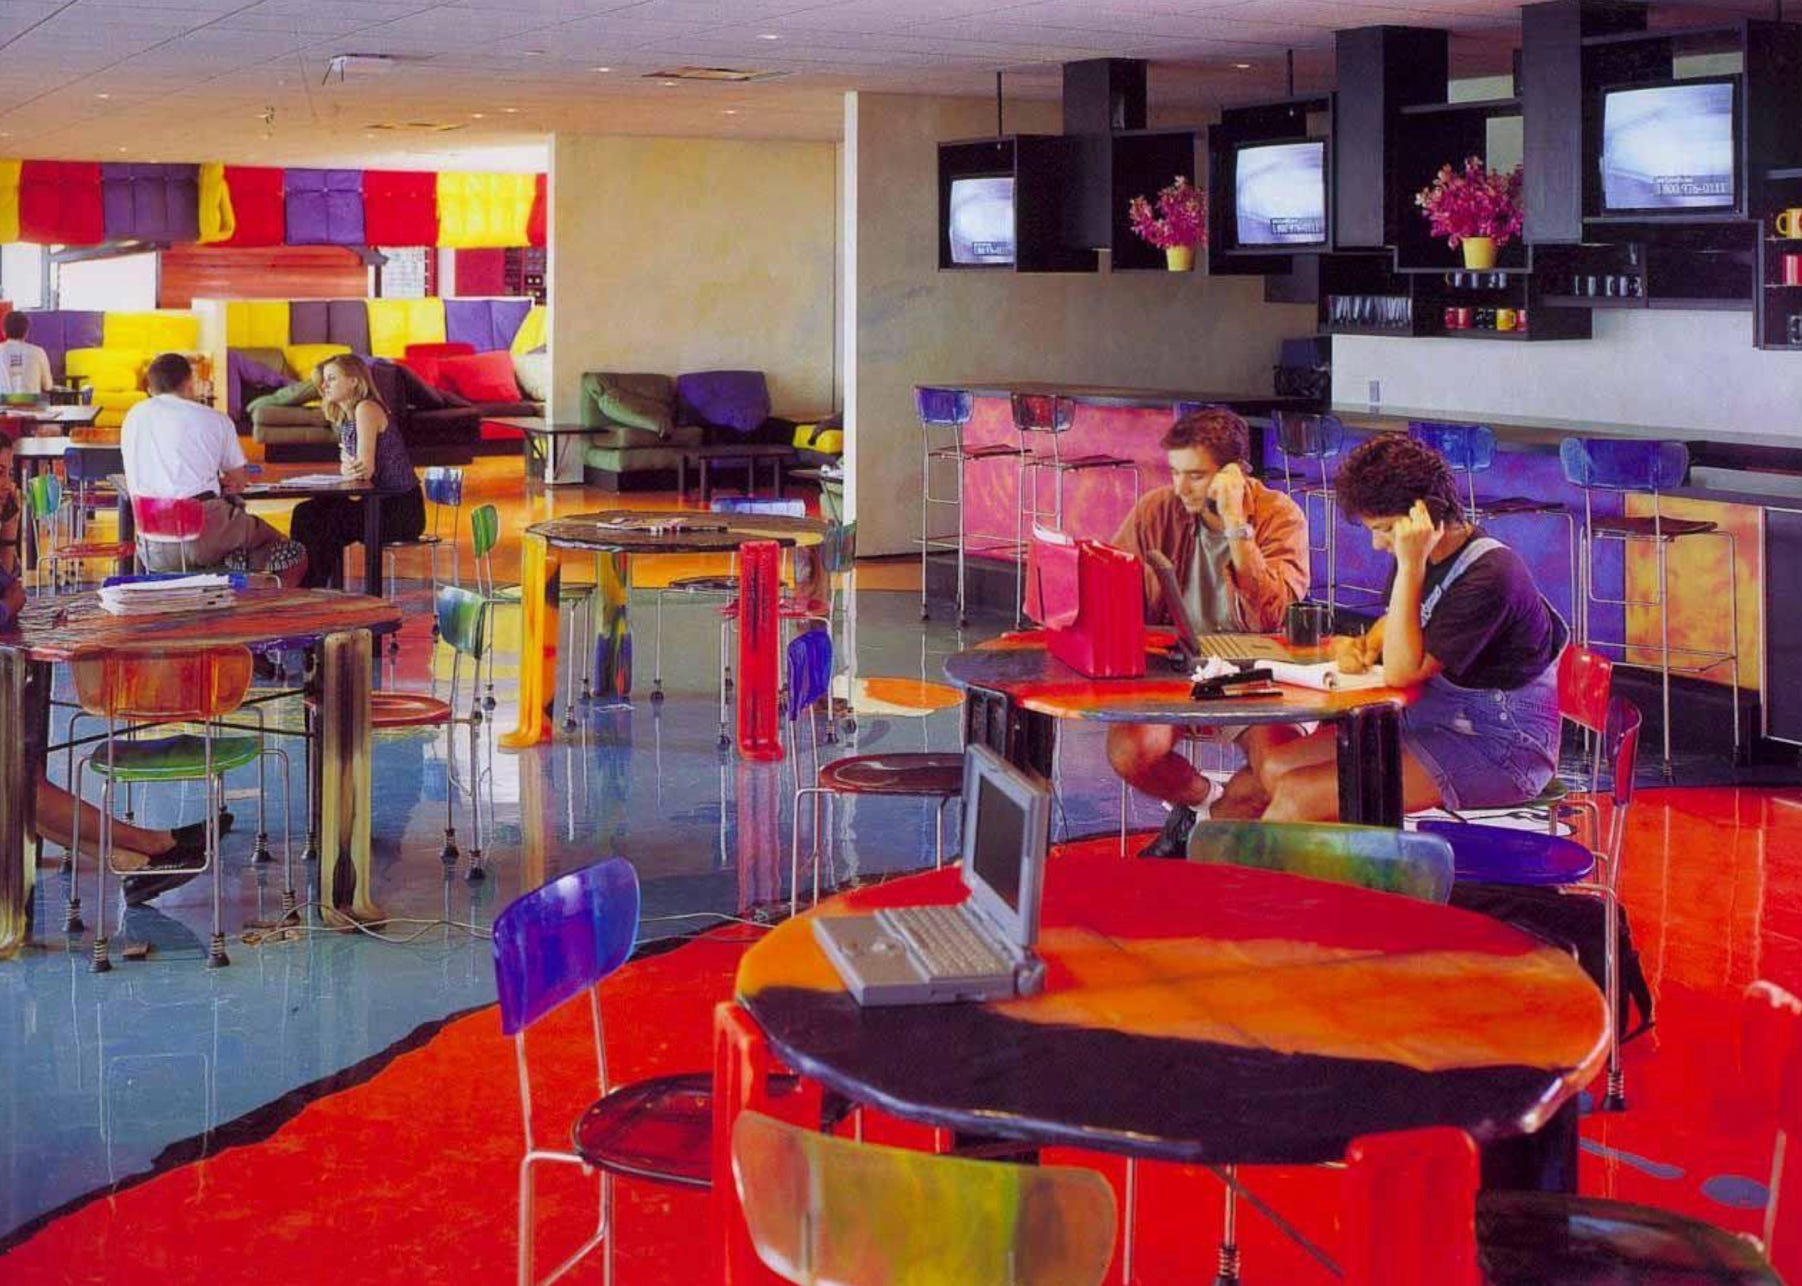 The Chiat/Day office in New York in 1995.  Photo by Donatella Brun and originally published in Domus 769, March 1995.